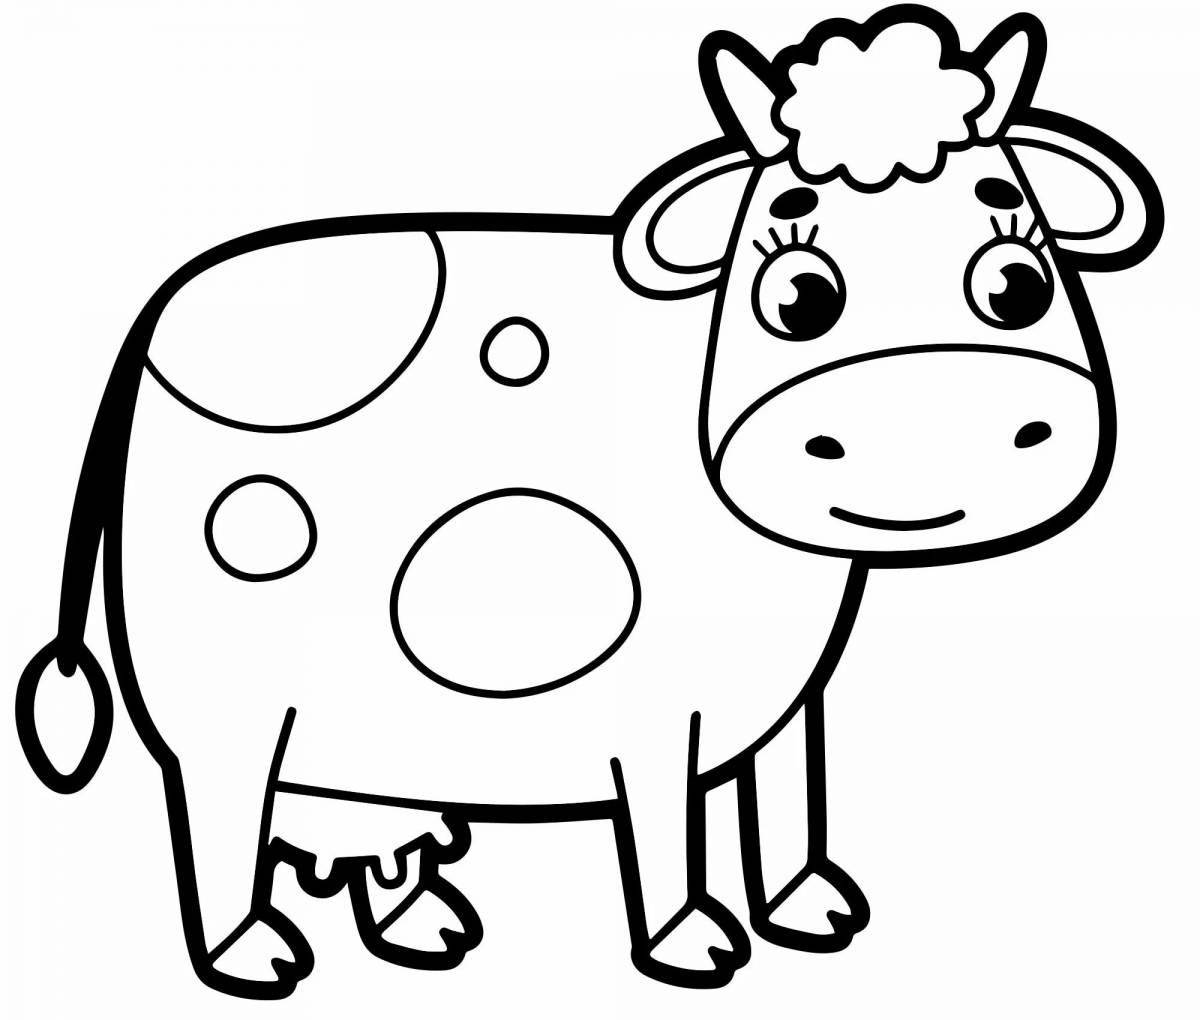 Exquisite cow coloring book for kids